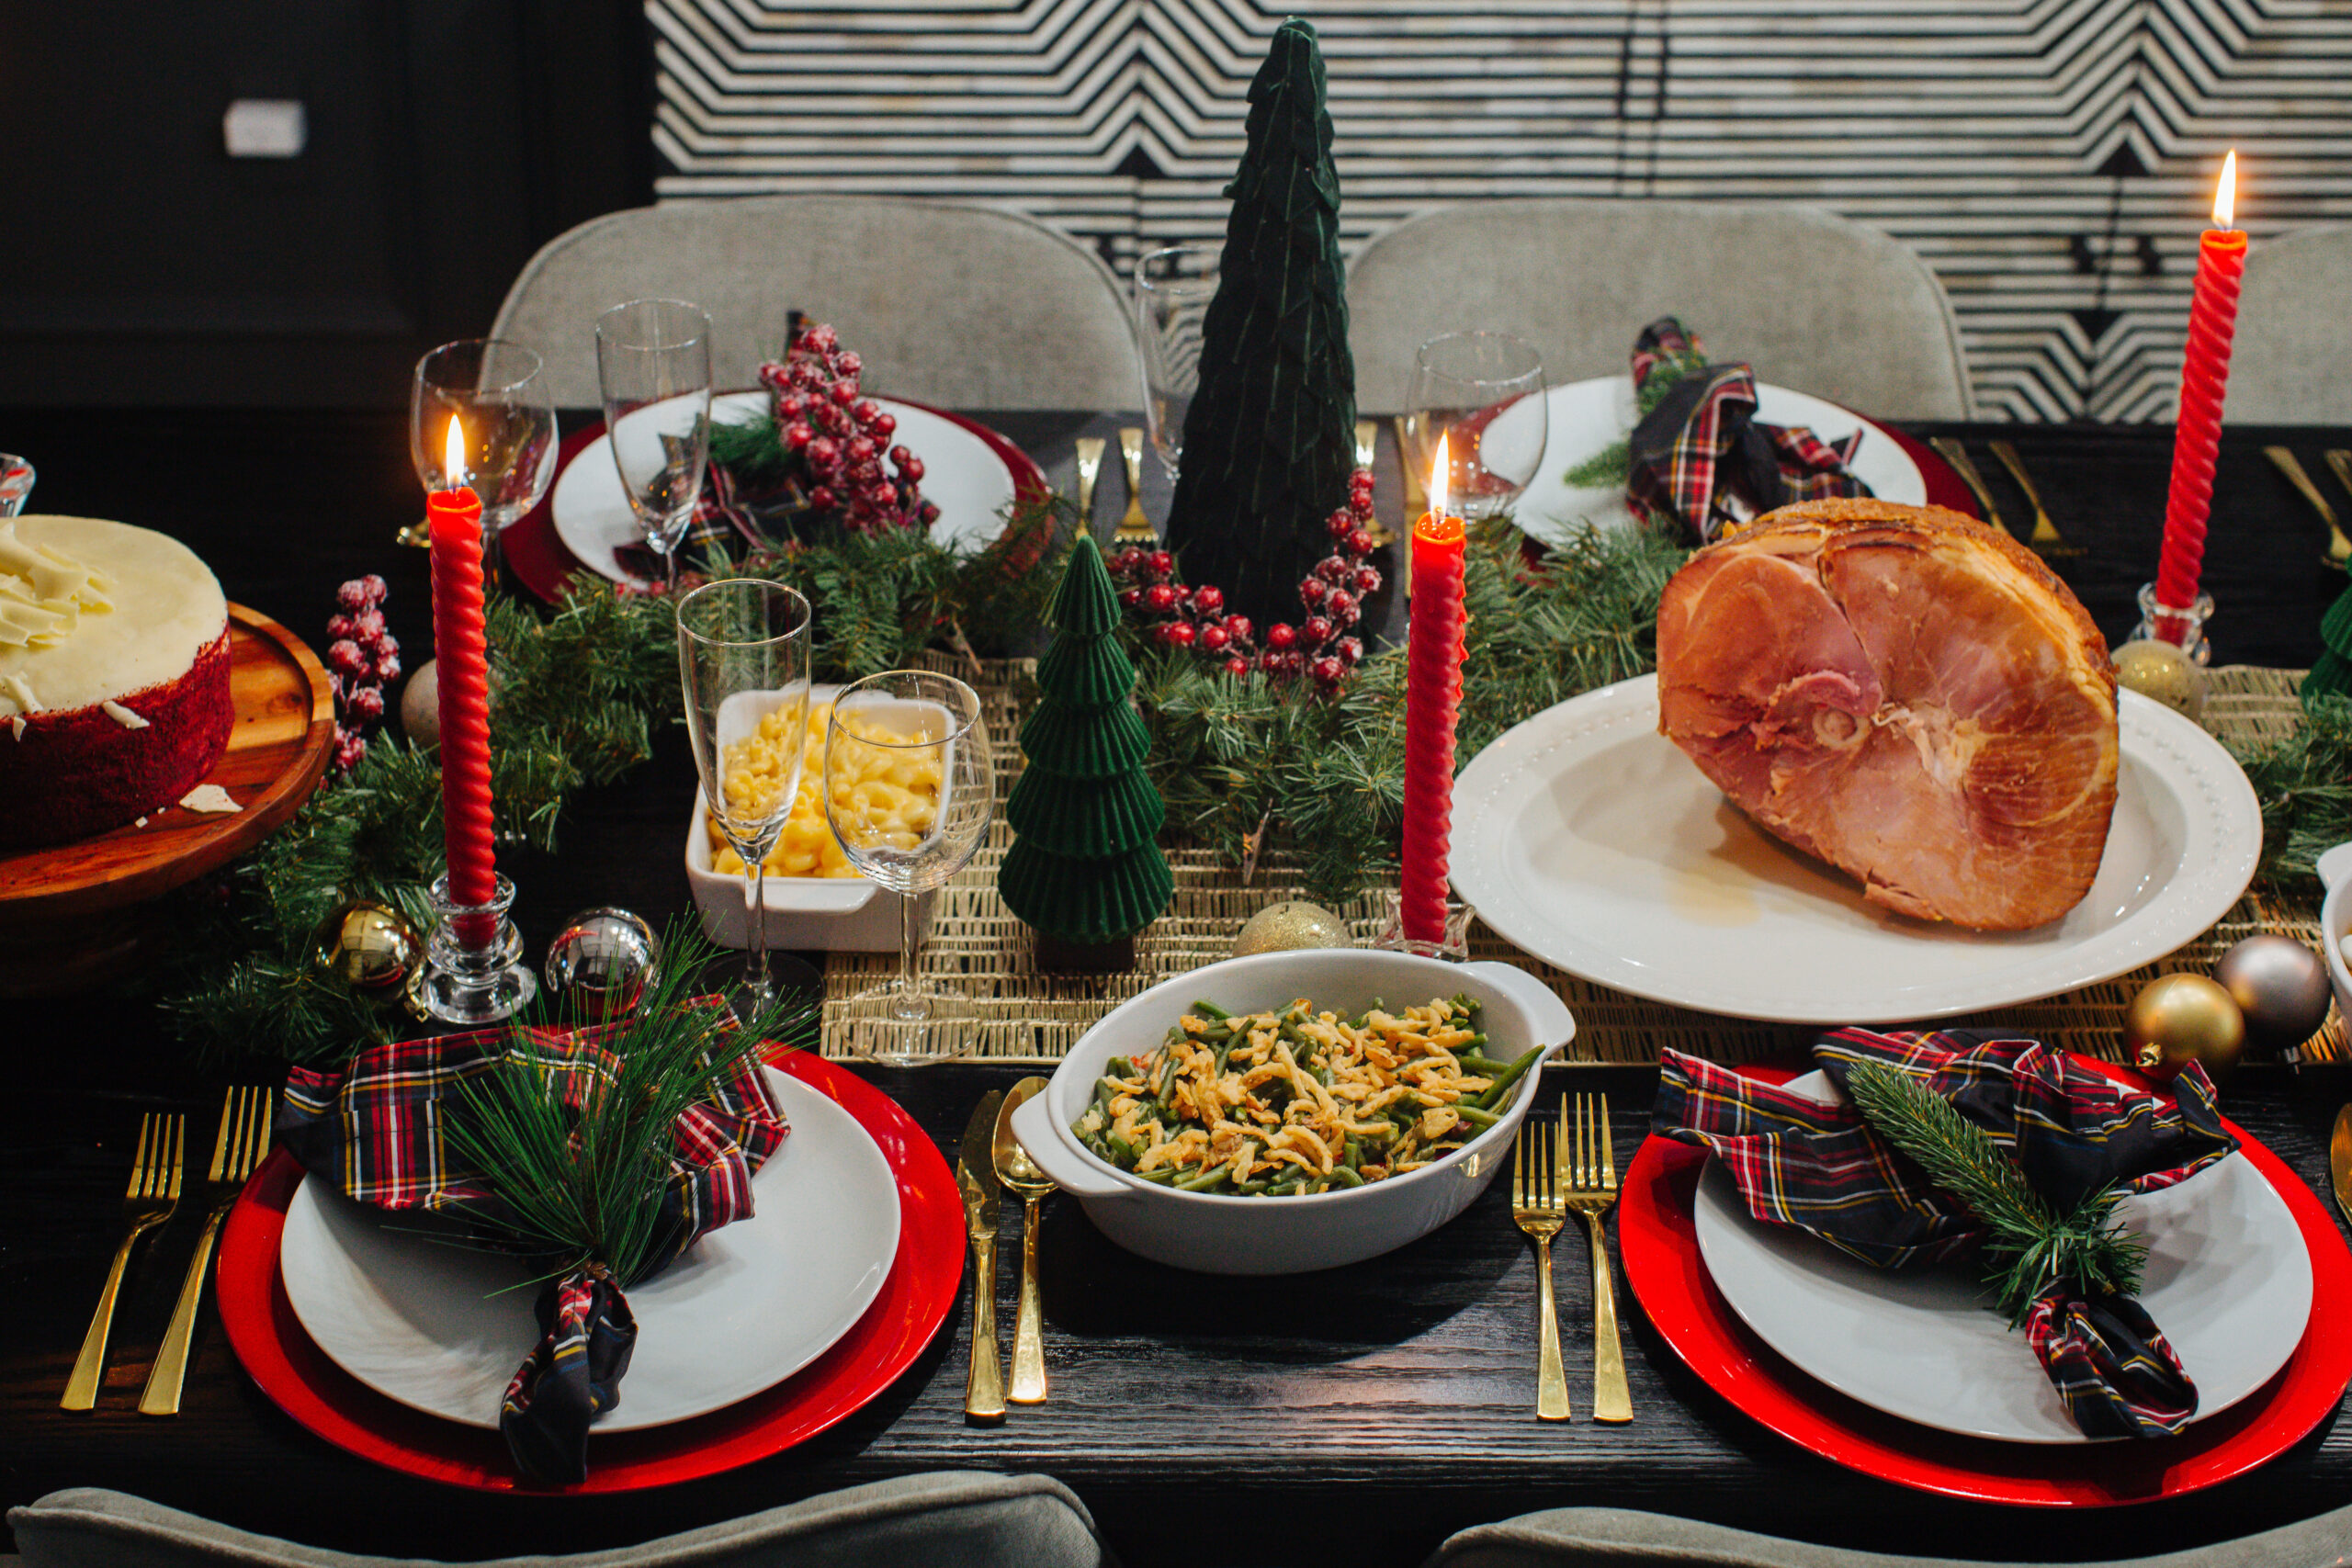 Looking for the perfect yet easy holiday tablescape setup this year? CLICK HERE for tips for an easy holiday tablescape + my holiday menu this year! 